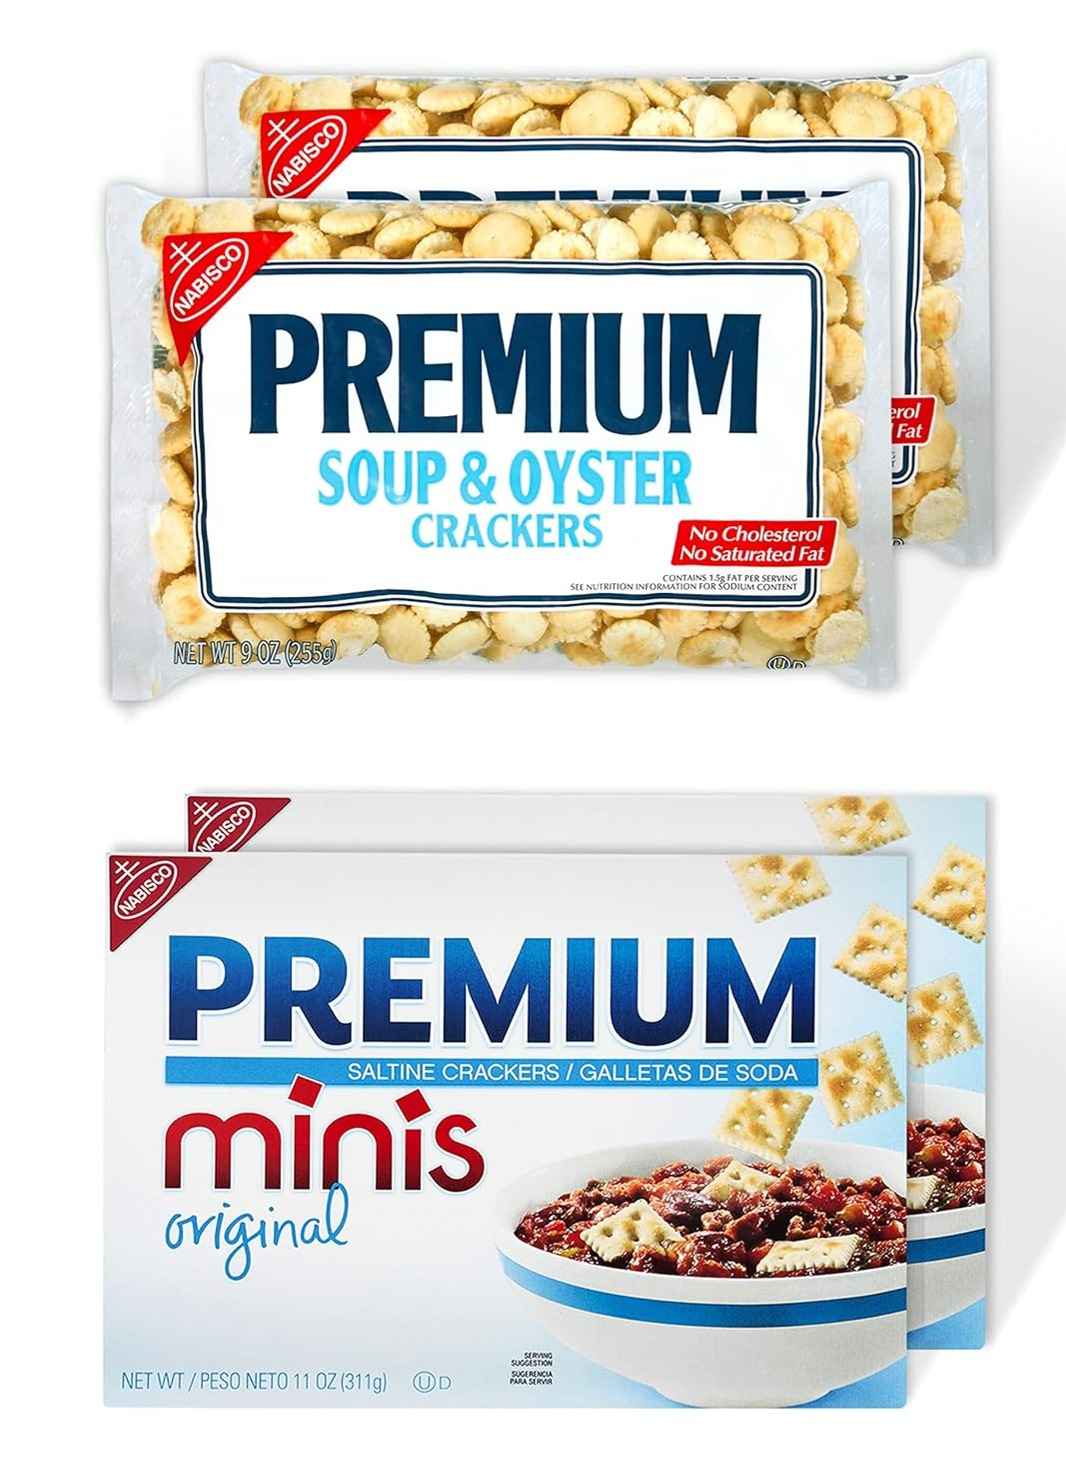 Premium Crackers Variety Pack: 2-Pack 11-Oz Mini Saltine Crackers + 2-Pack 9-Oz Soup & Oyster Crackers $7.84 w/ S&S + Free Shipping w/ Prime or on orders over $35